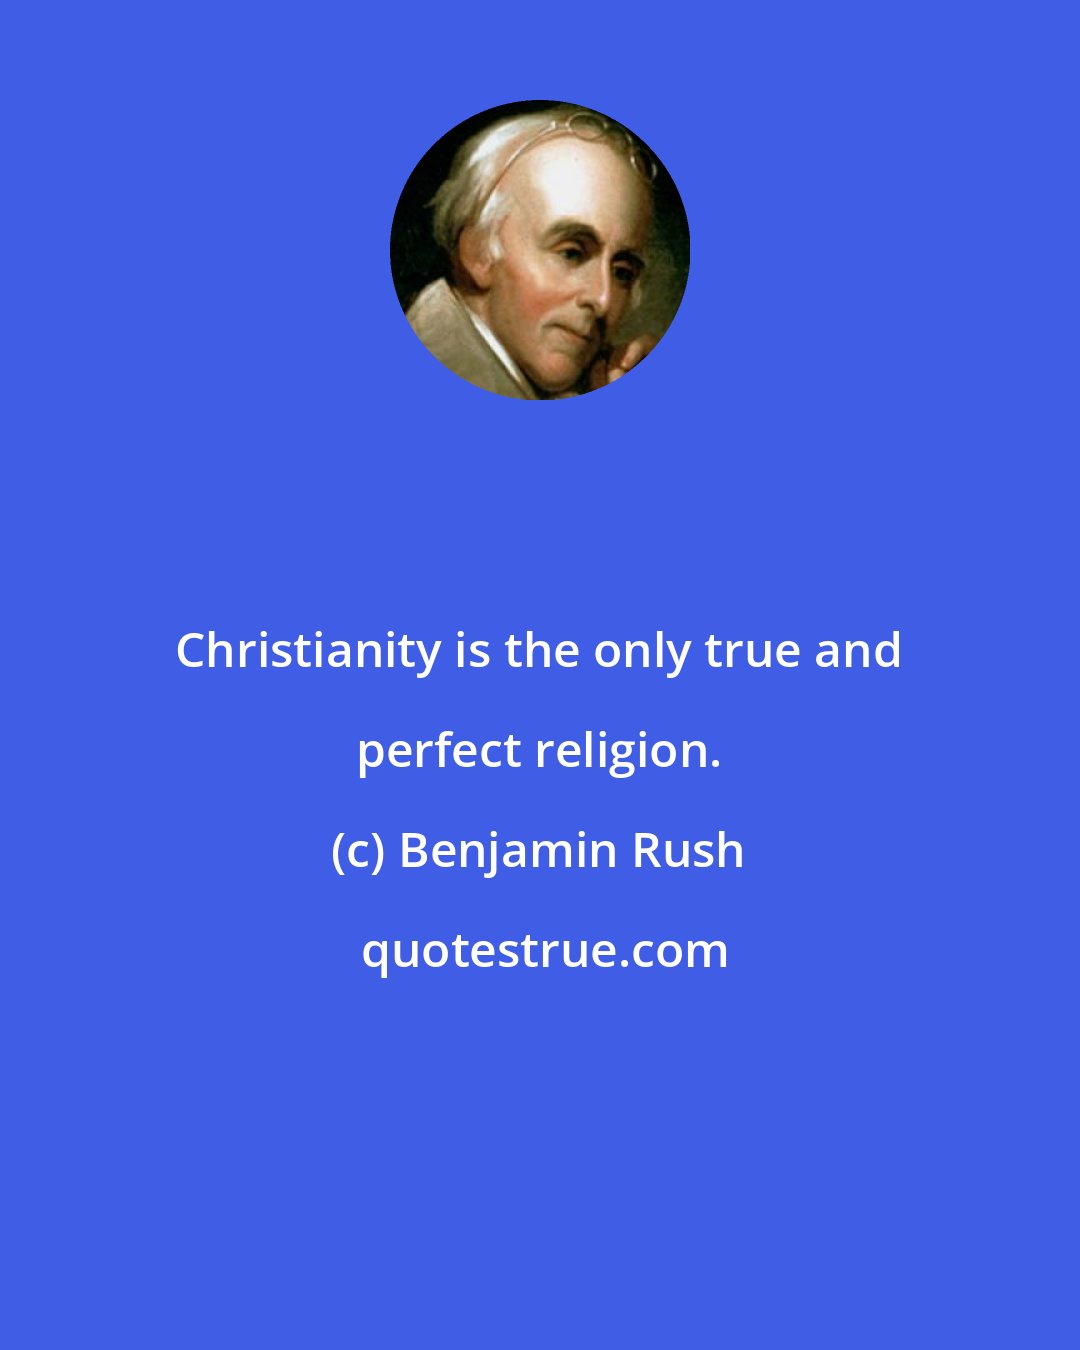 Benjamin Rush: Christianity is the only true and perfect religion.